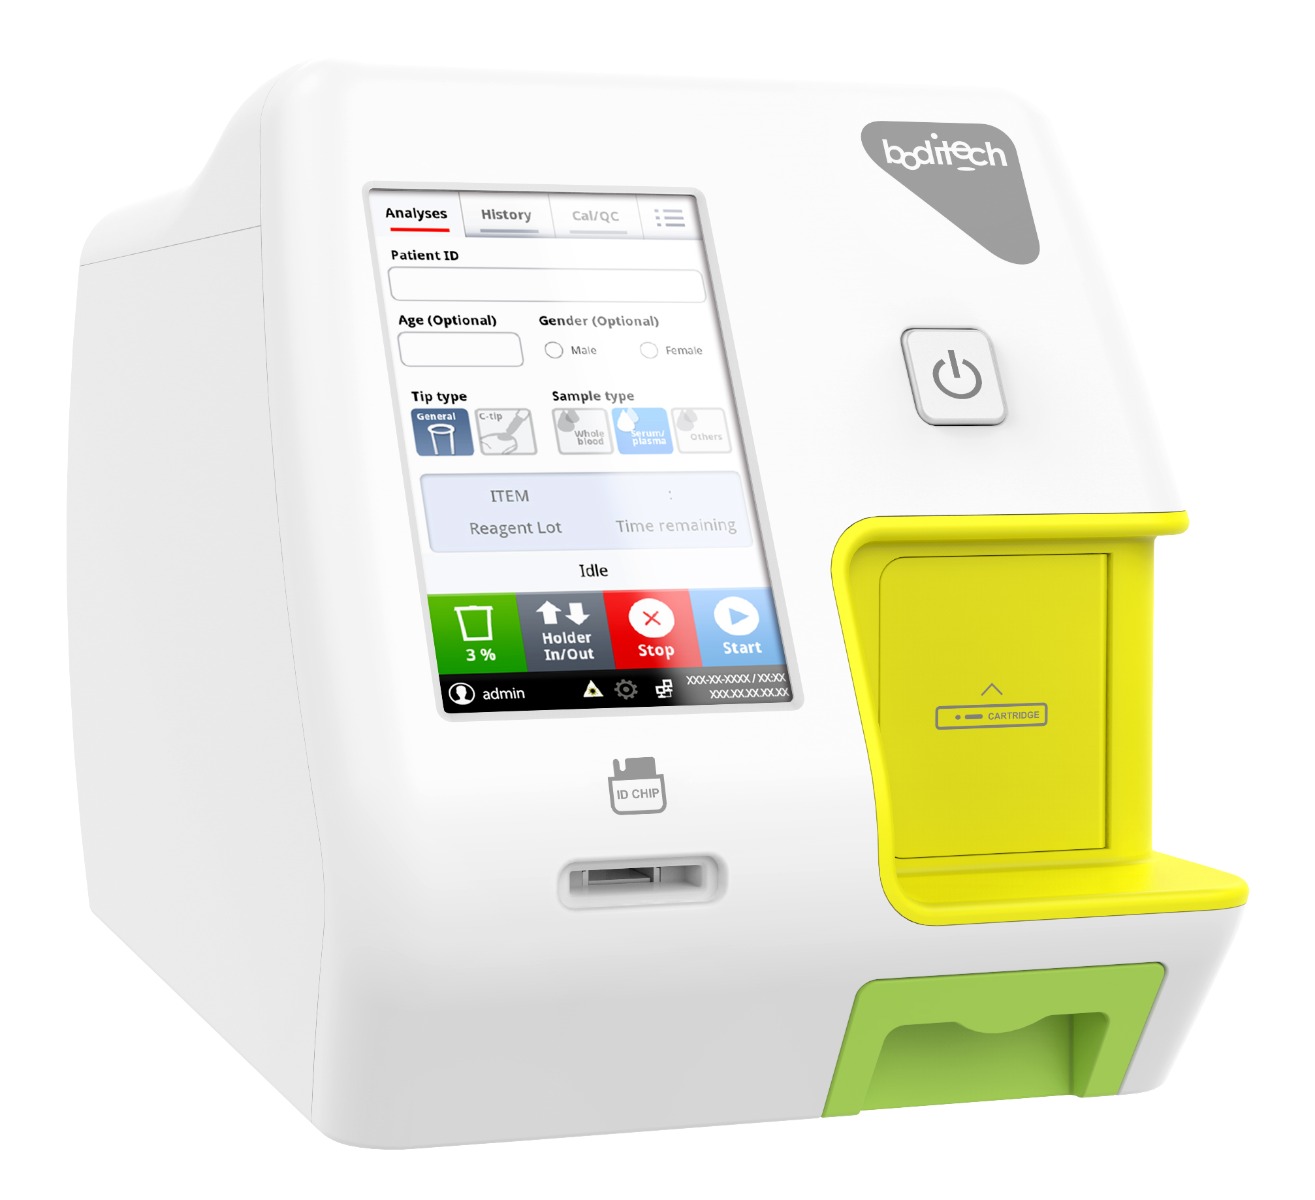 The Afias-1 is A compact immunoassay analyser with the all-in-one cartridge system